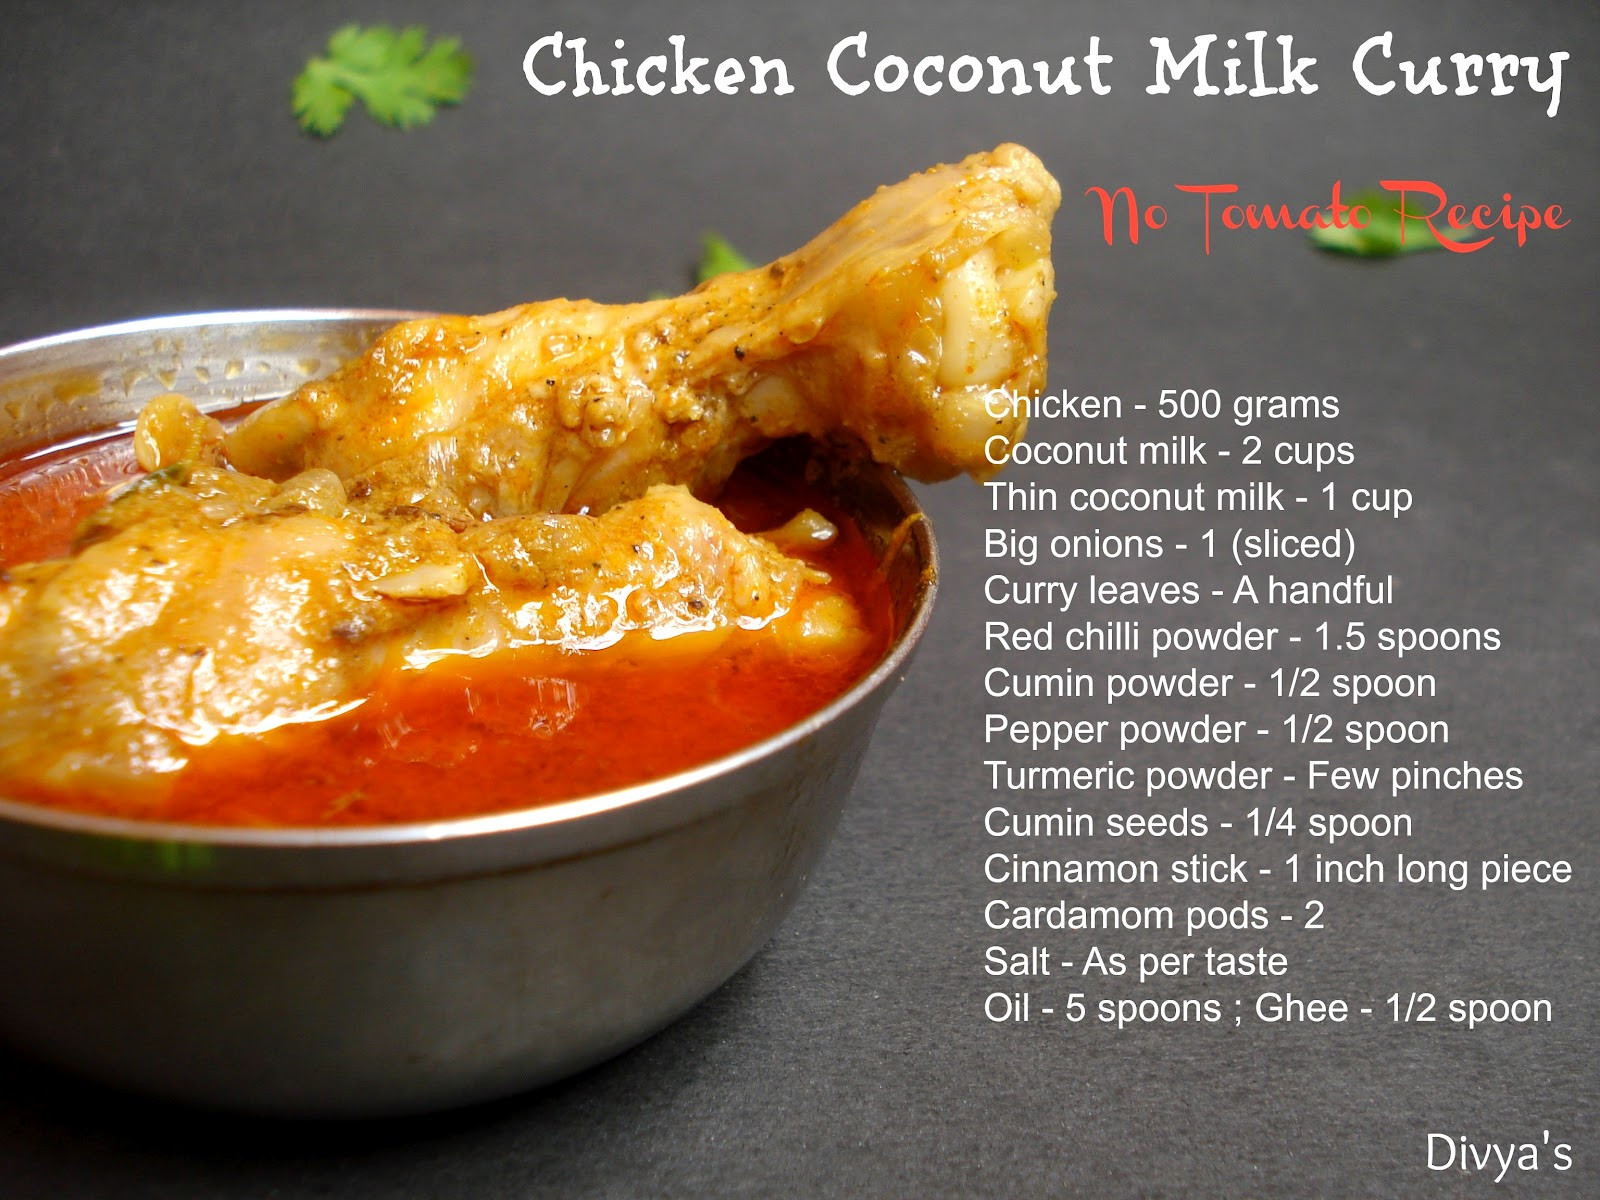 List Of Indian Chicken Recipes
 Chicken Coconut Milk Curry No Tomato Recipe You Too